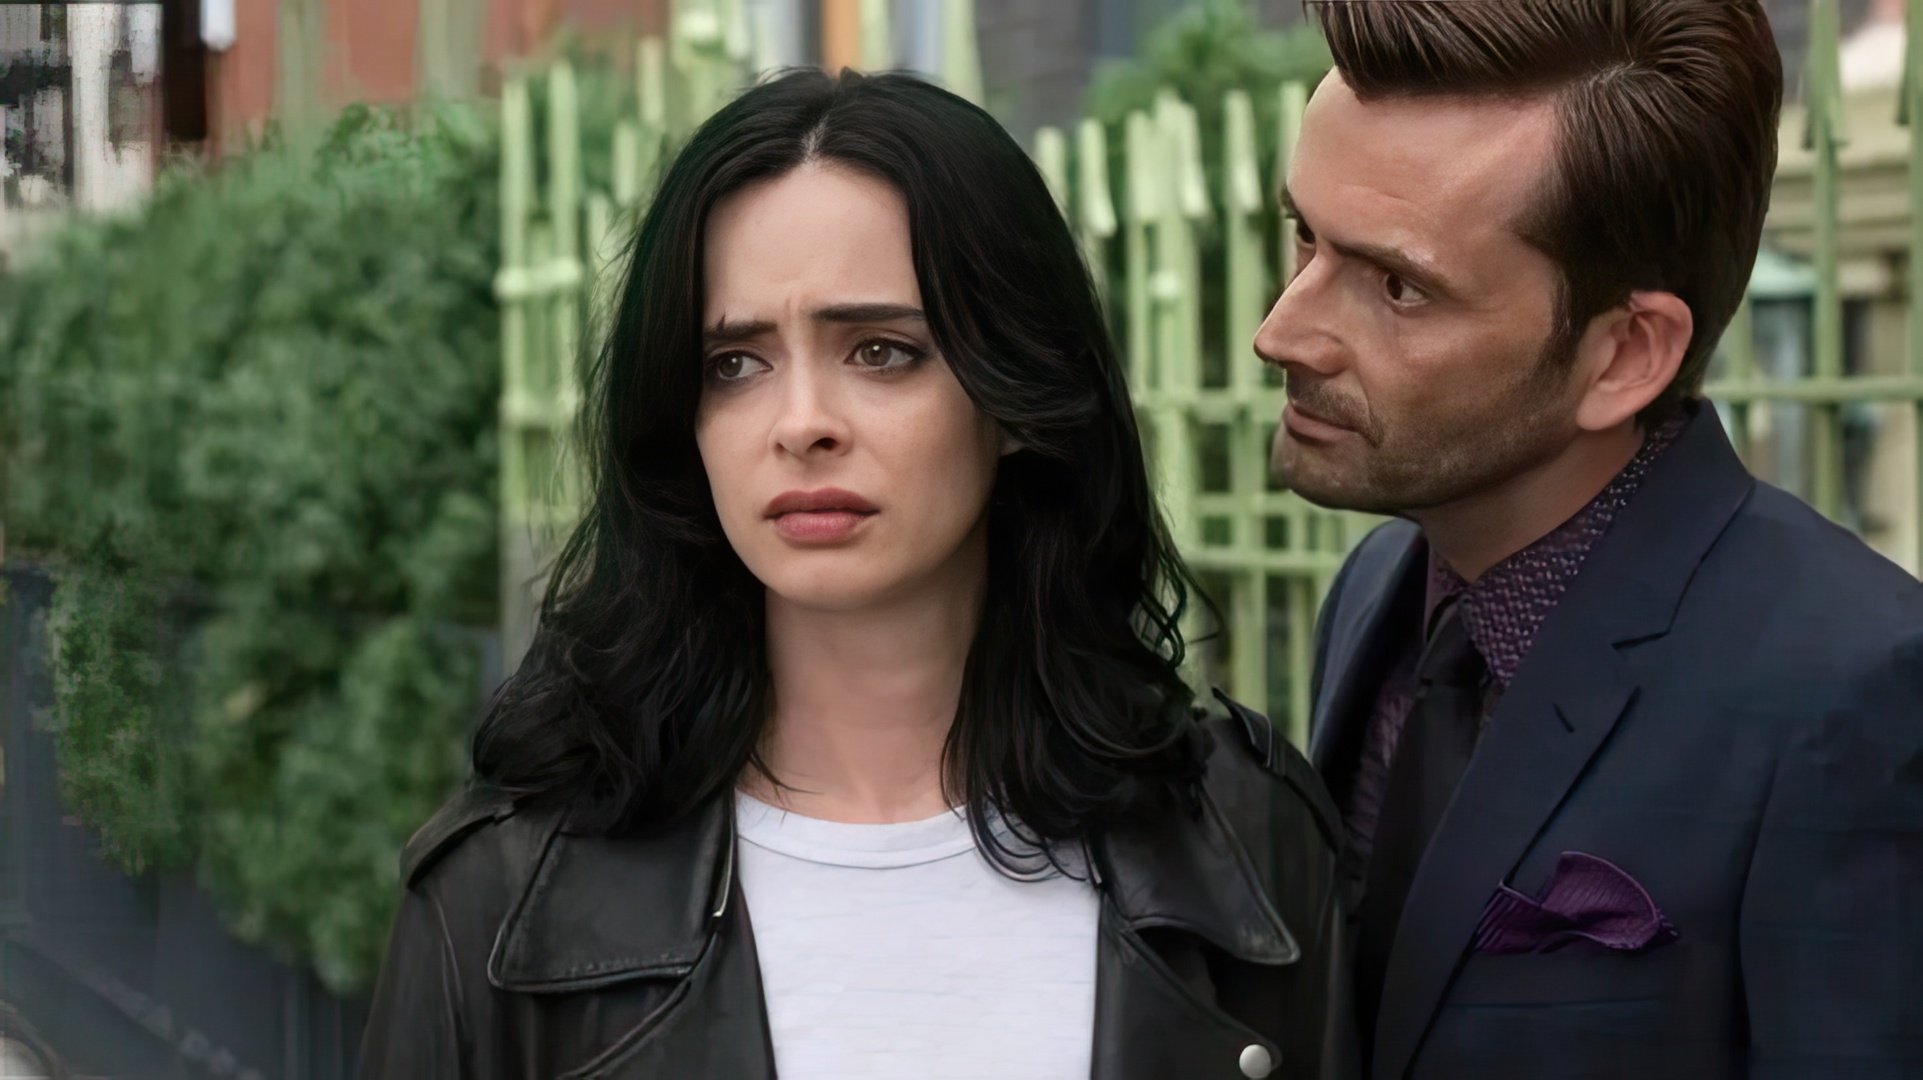 This scene from Jessica Jones even became a meme